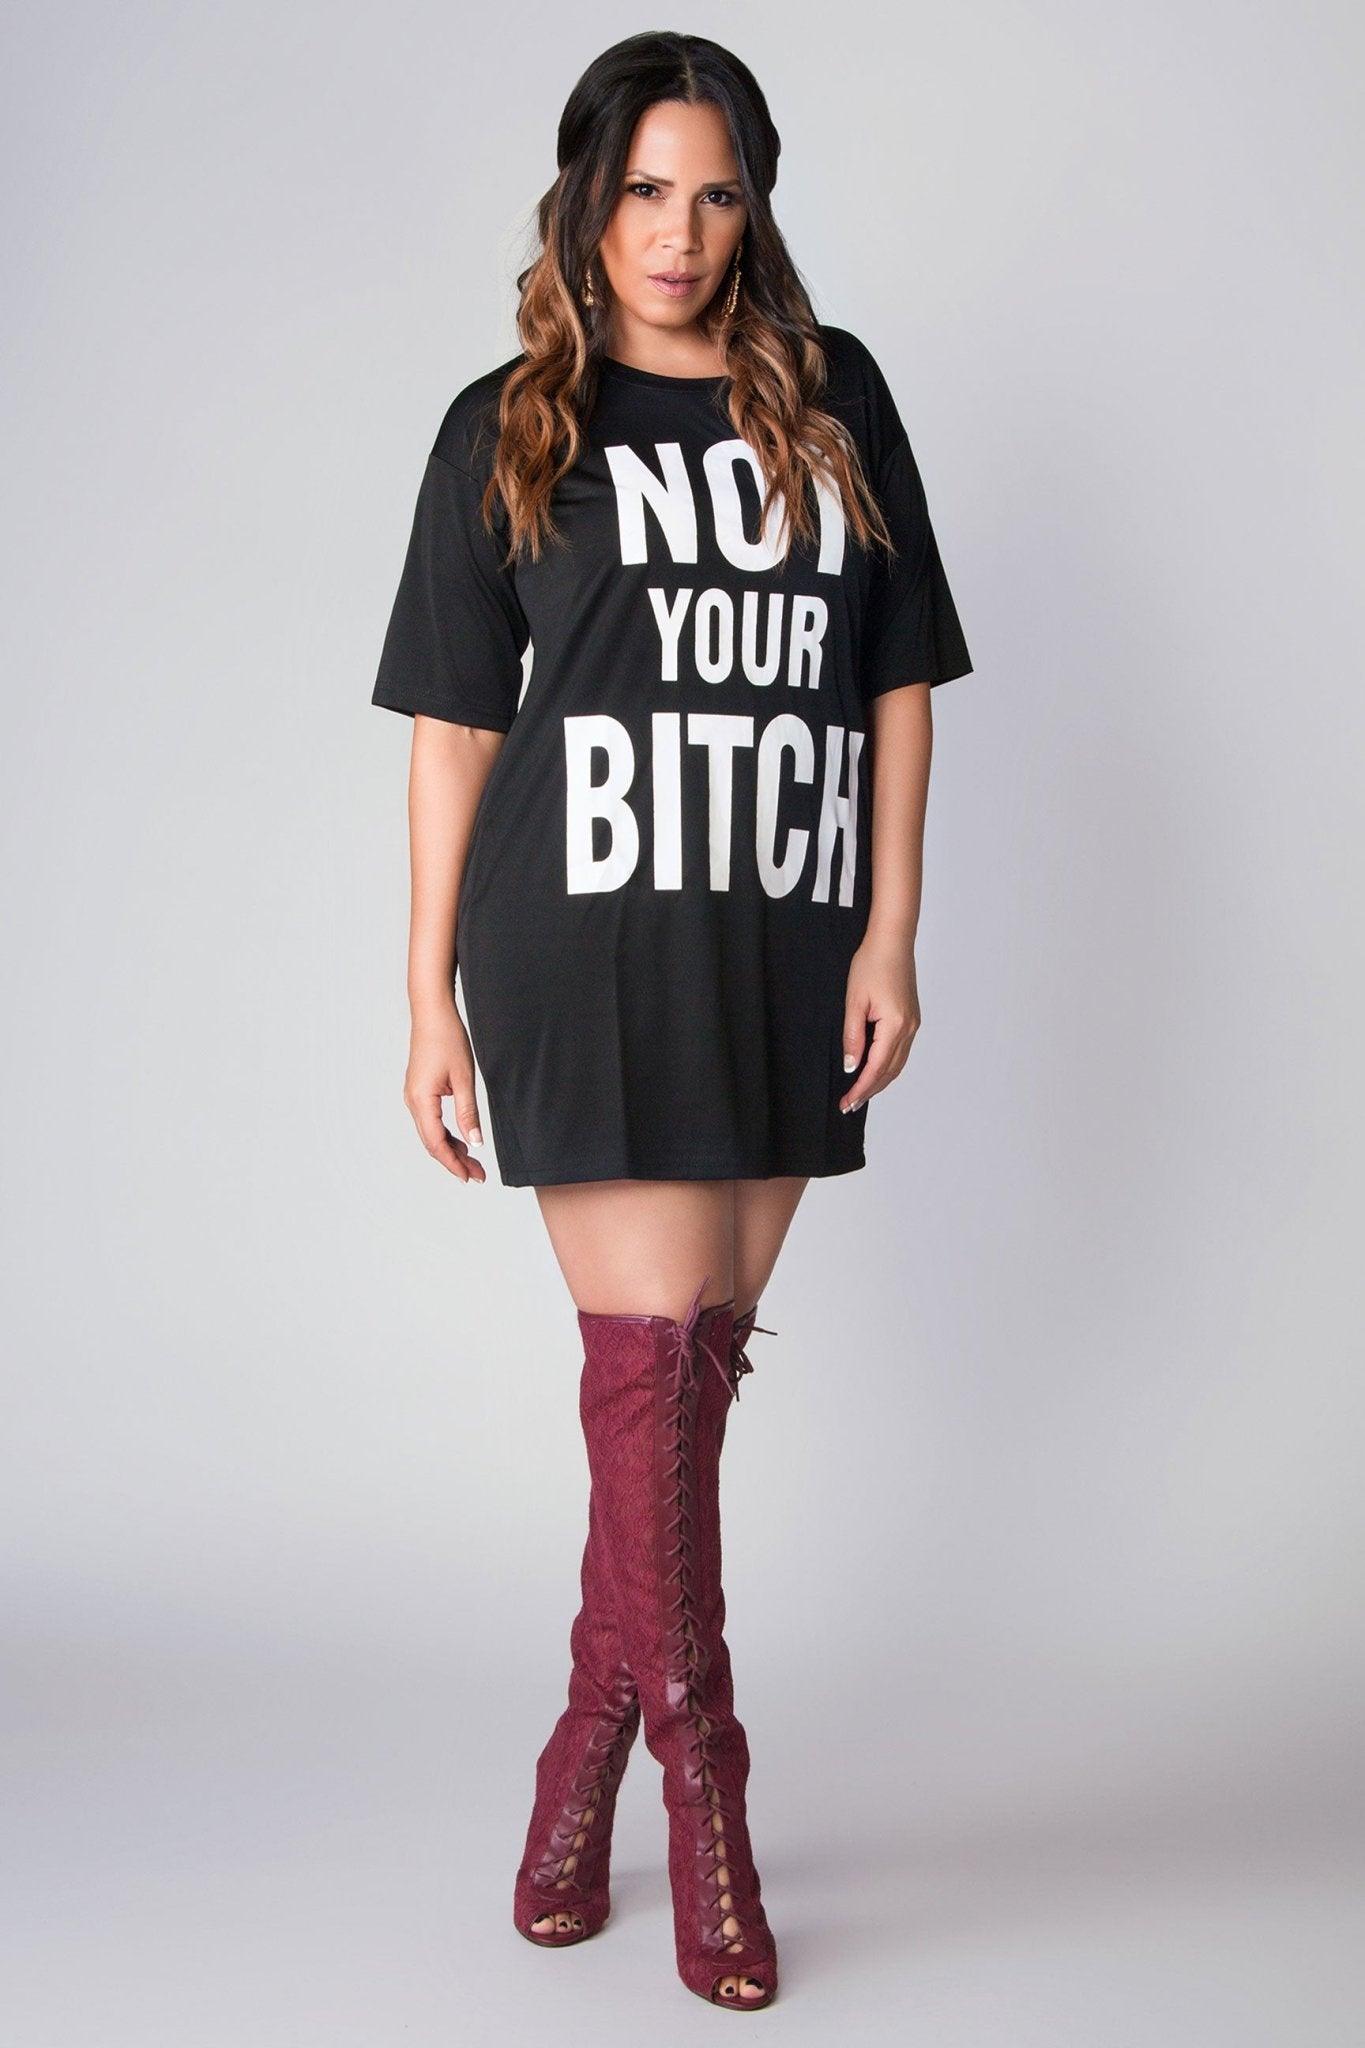 Not Your Bitch T-Shirt Dress - MY SEXY STYLES